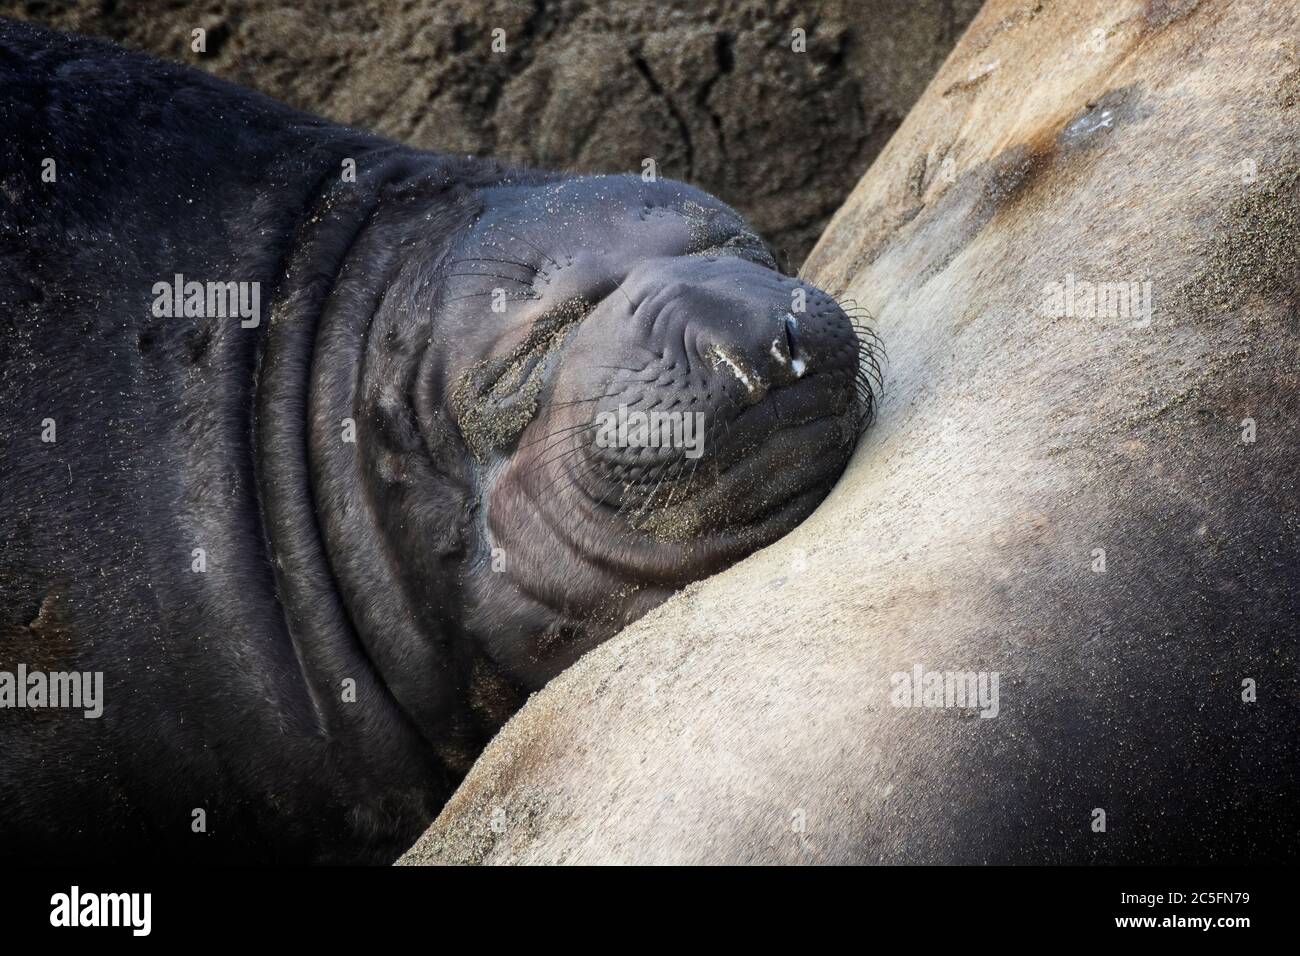 Baby northern elephant seal pup sleeps with face on mother in close up image on California beach. Stock Photo